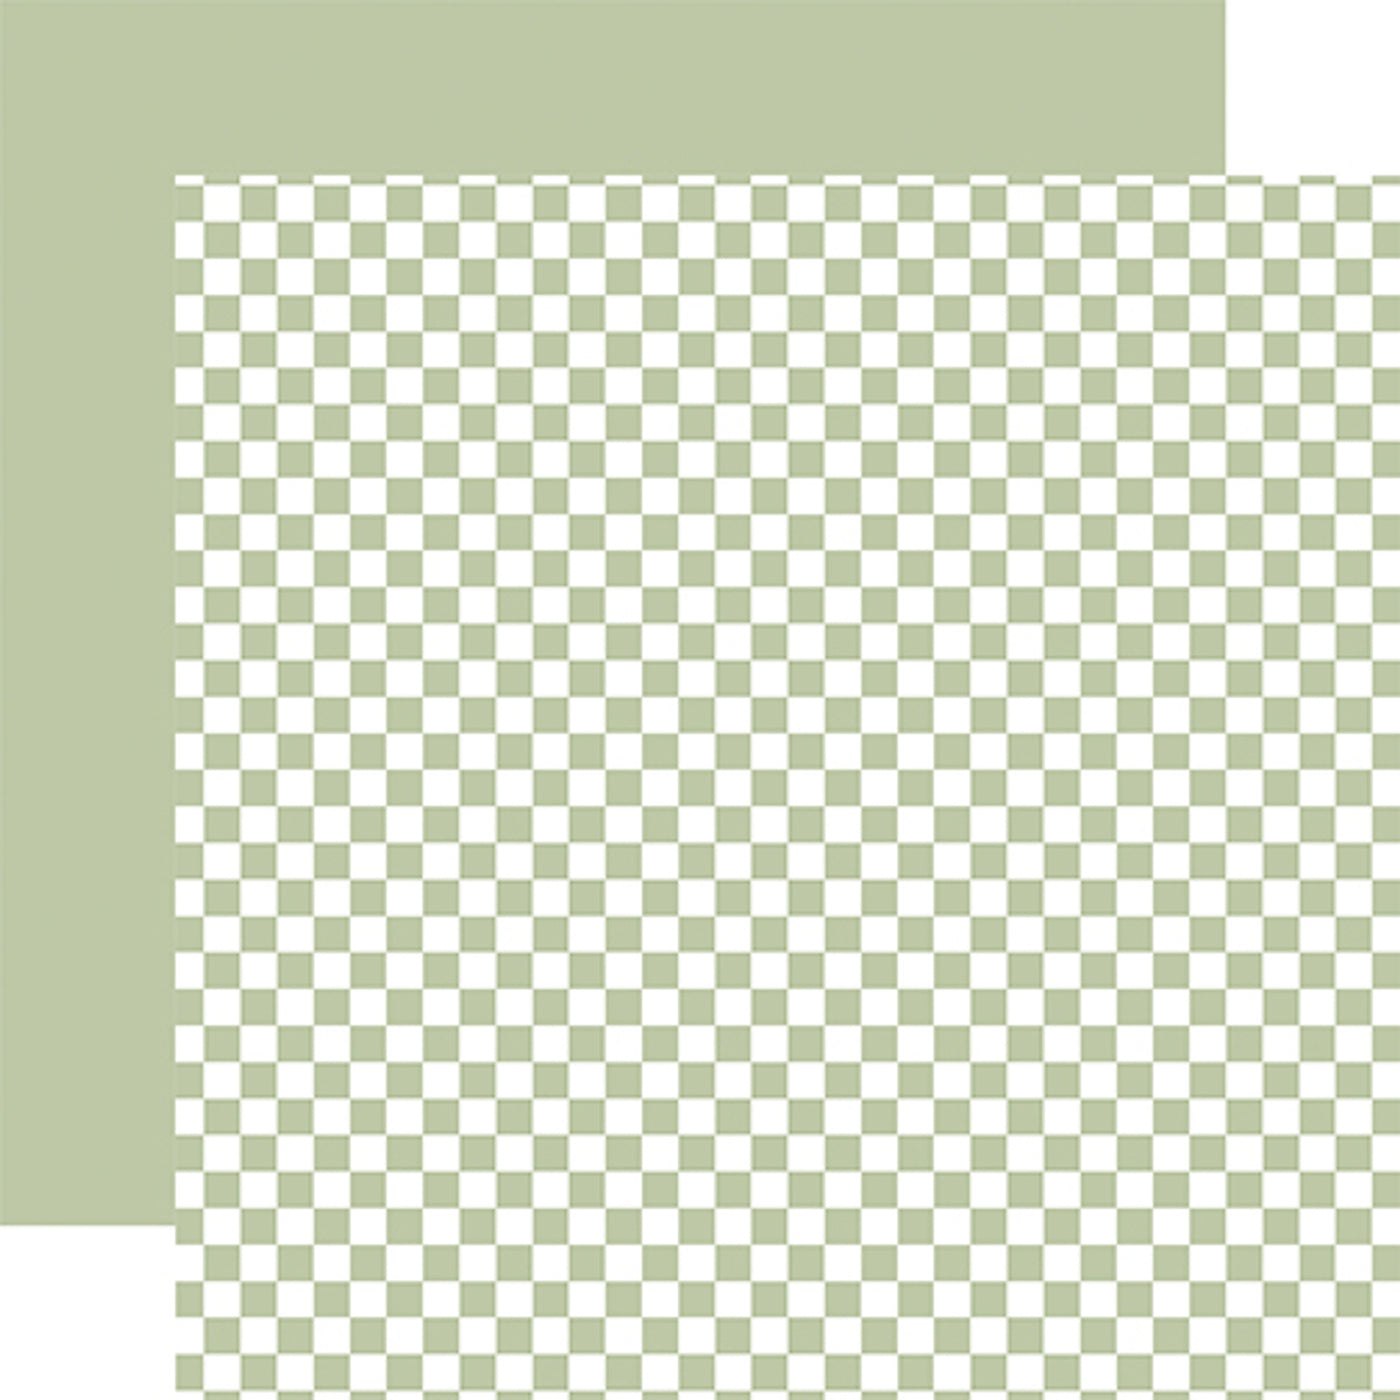 Double-sided 12x12 cardstock sheets - celery checkered, celery solid reverse. 65 lb. smooth cardstock. -Echo Park